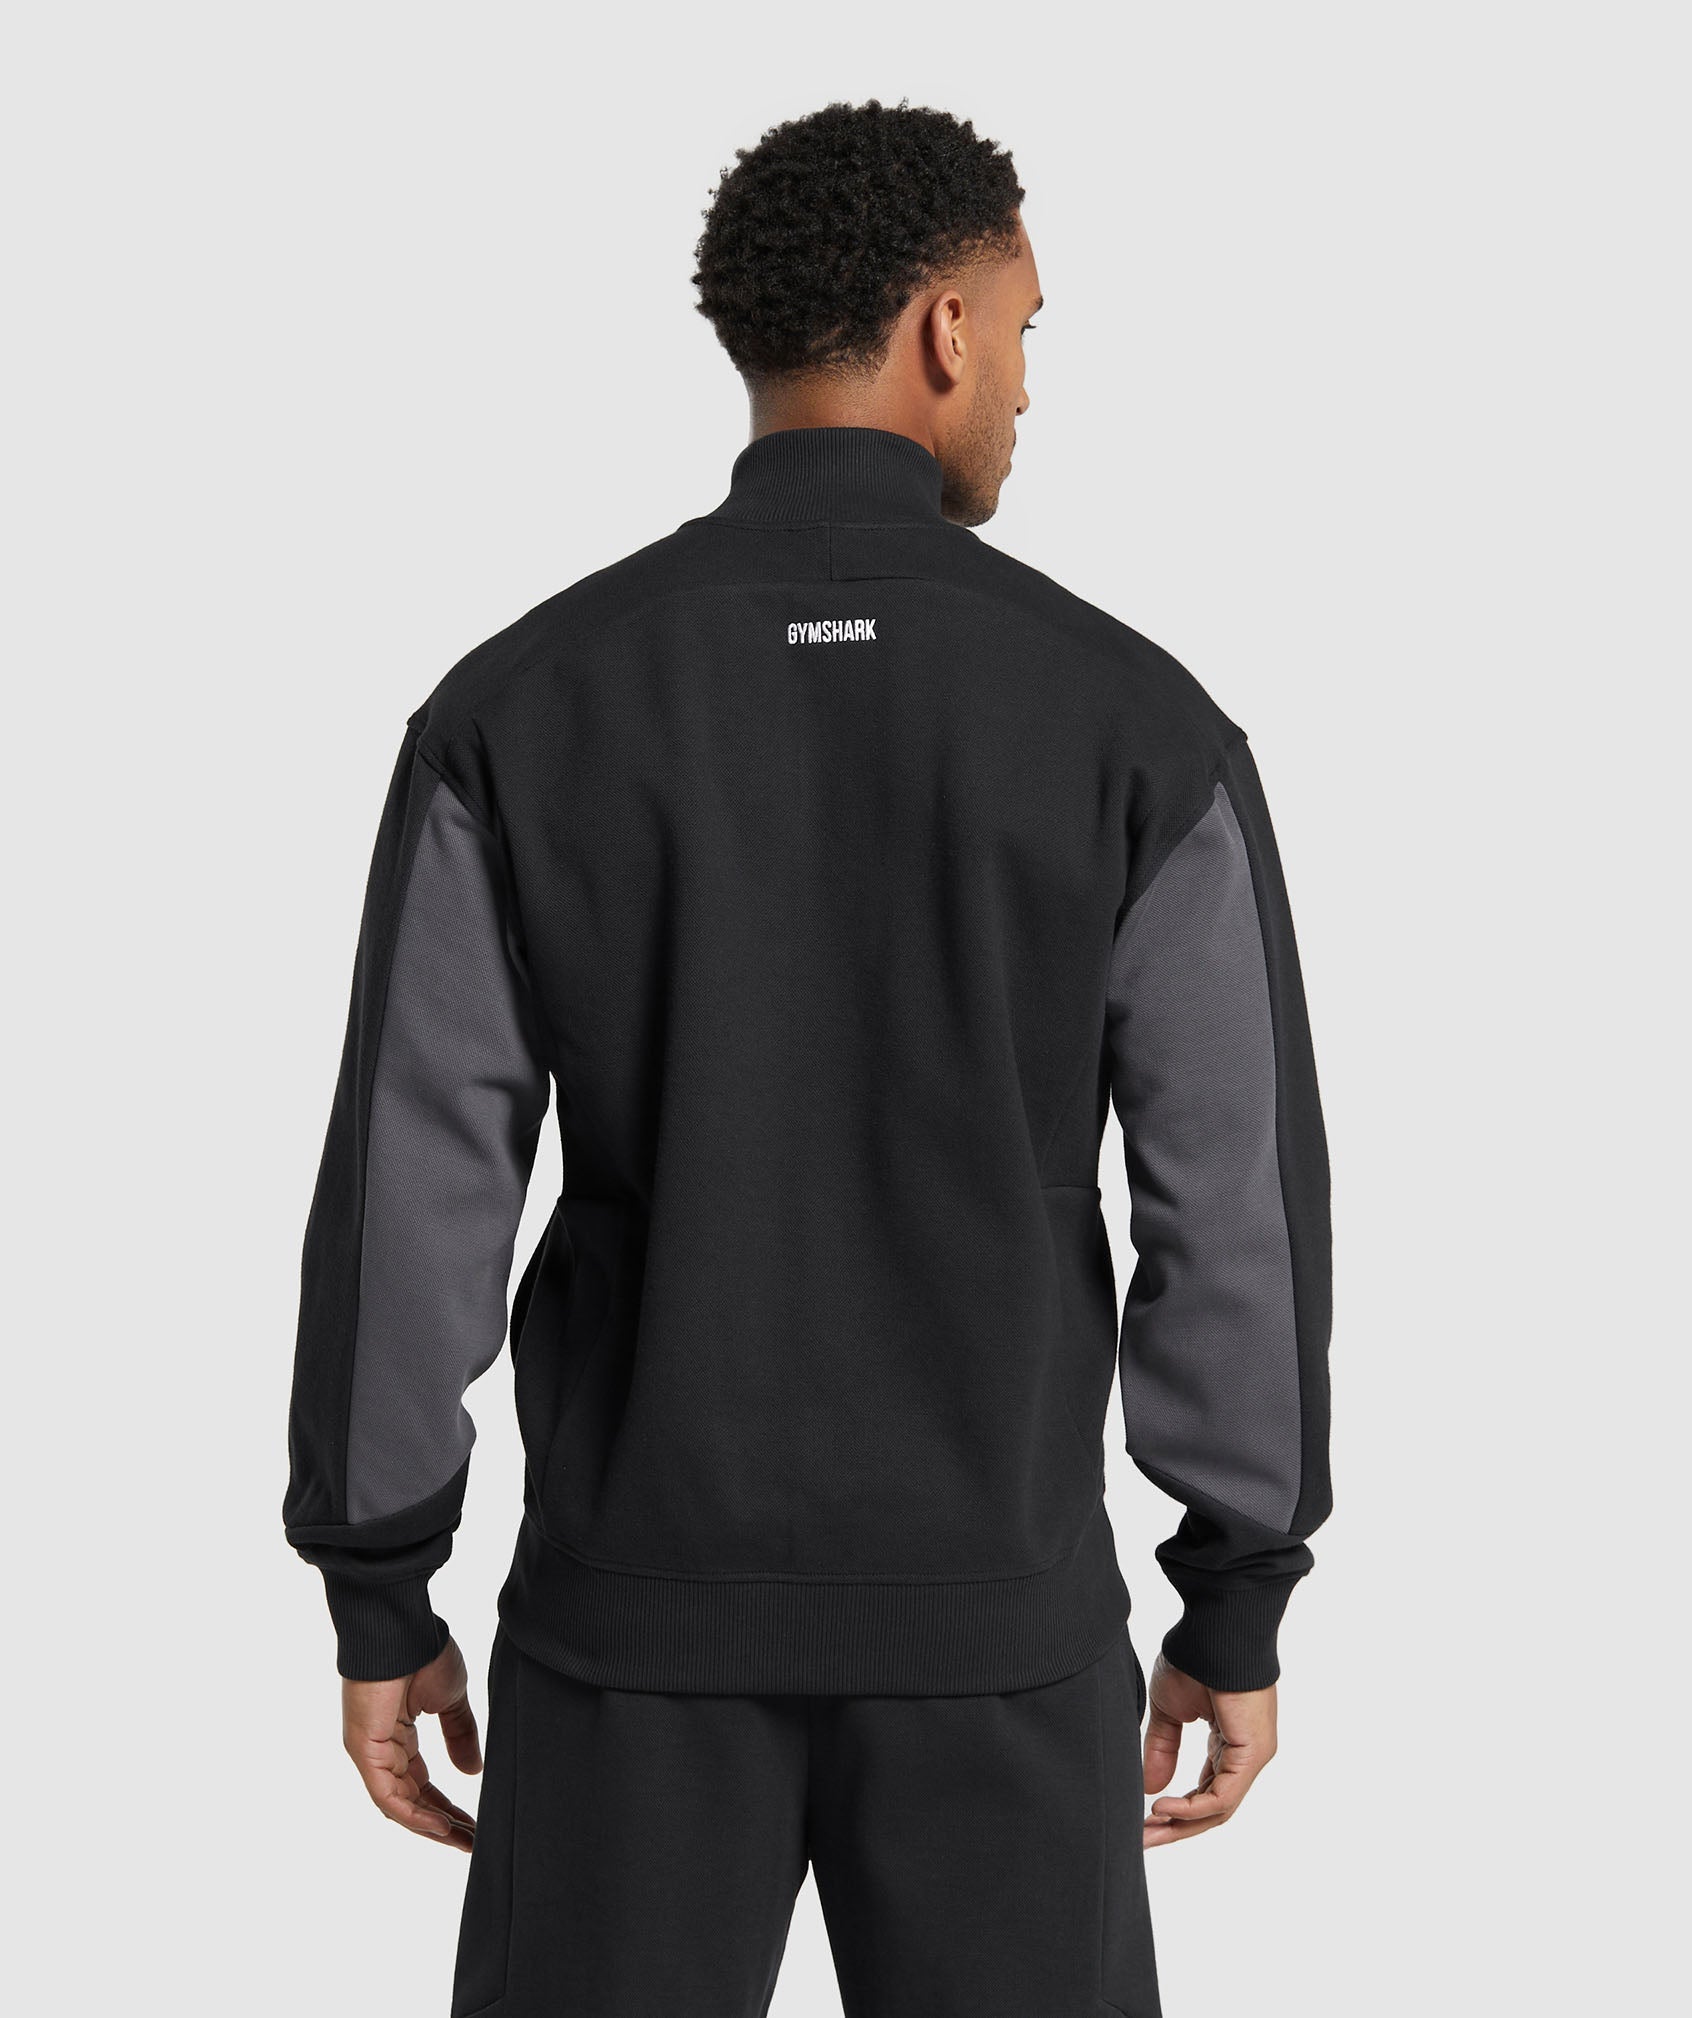 Gymshark Clothing (100+ products) compare price now »